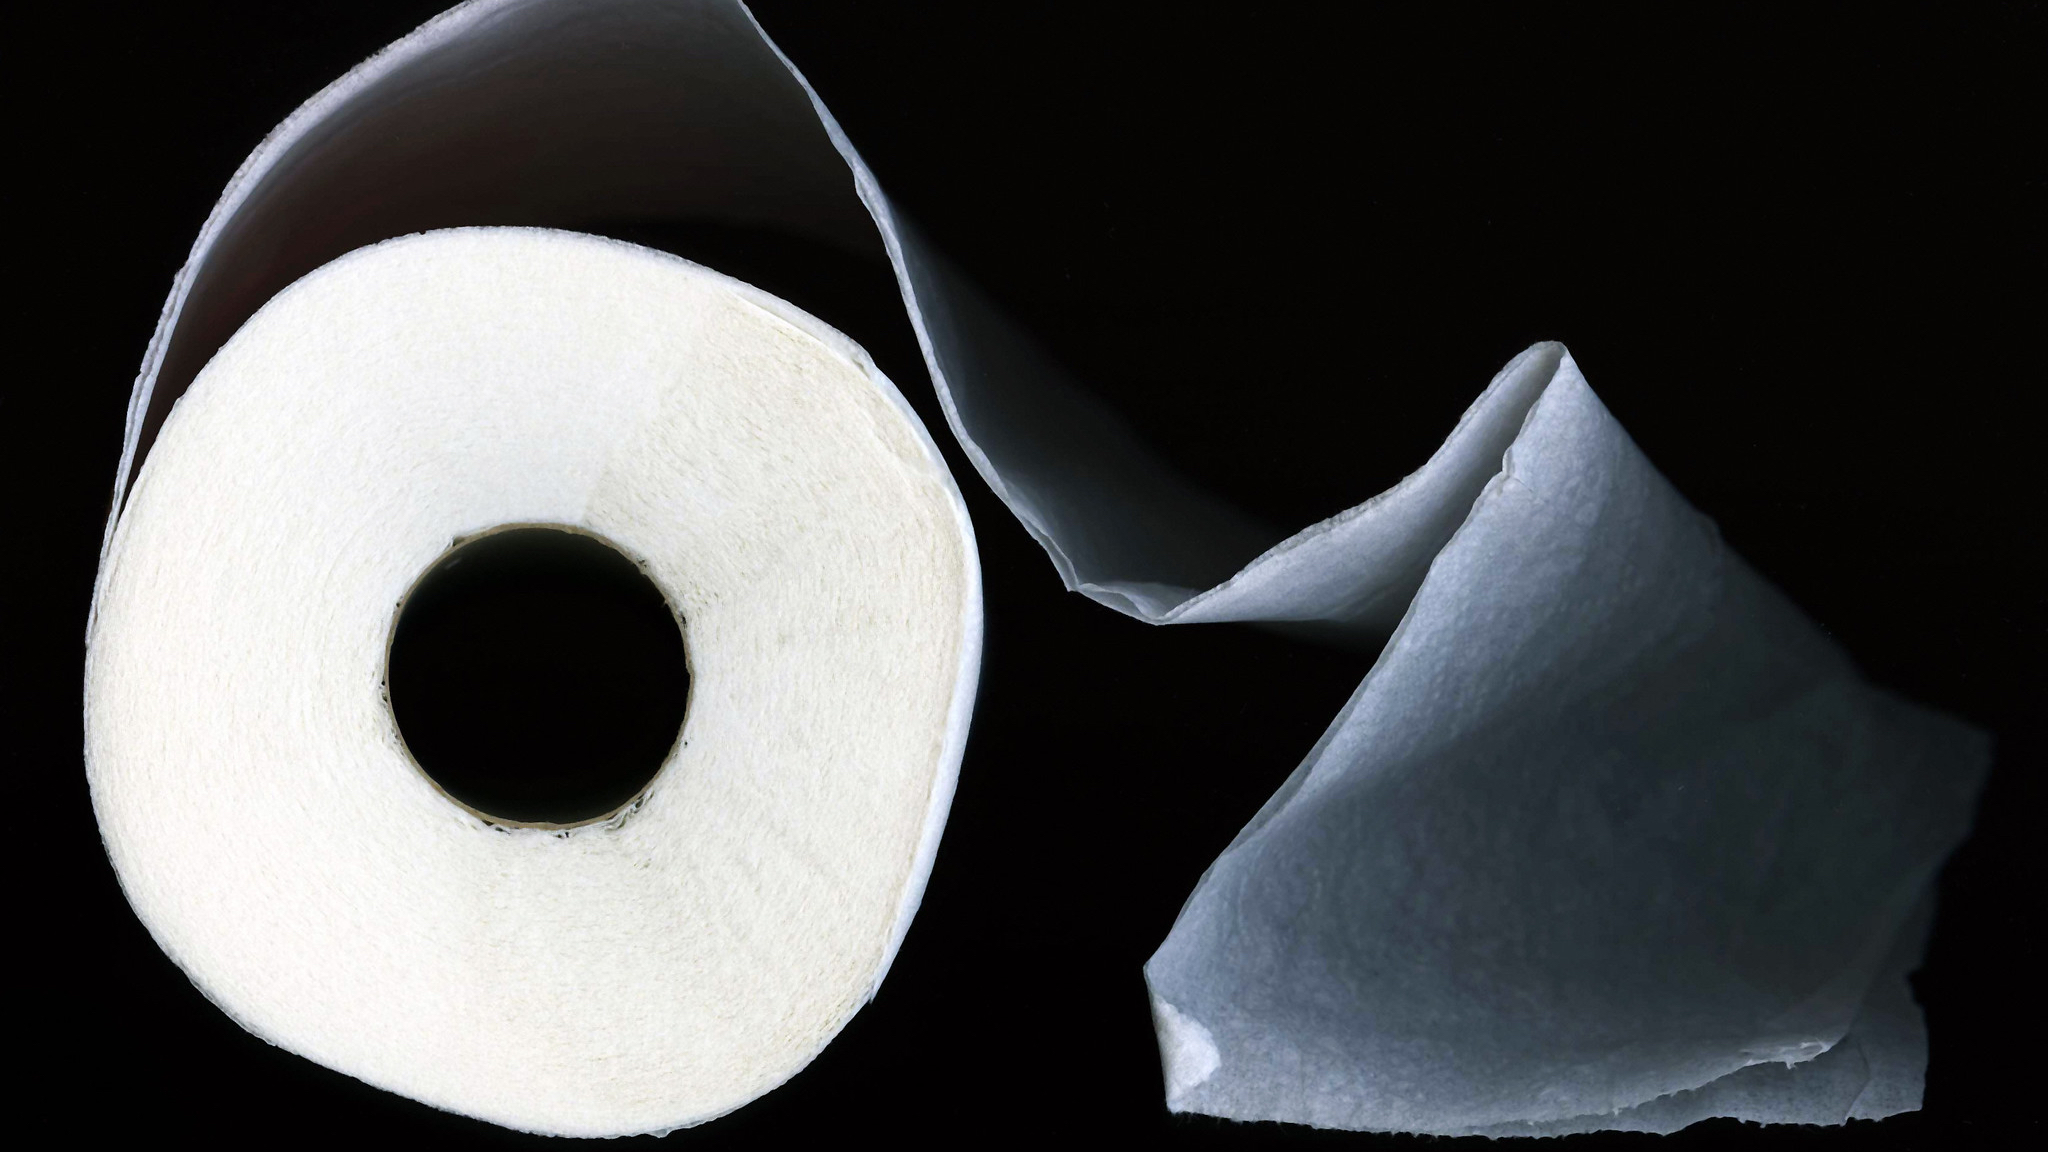 Toilet paper hoarding might be irrational, but it's in character for Americans. We love the stuff. (Sharon Mollerus / Flickr)